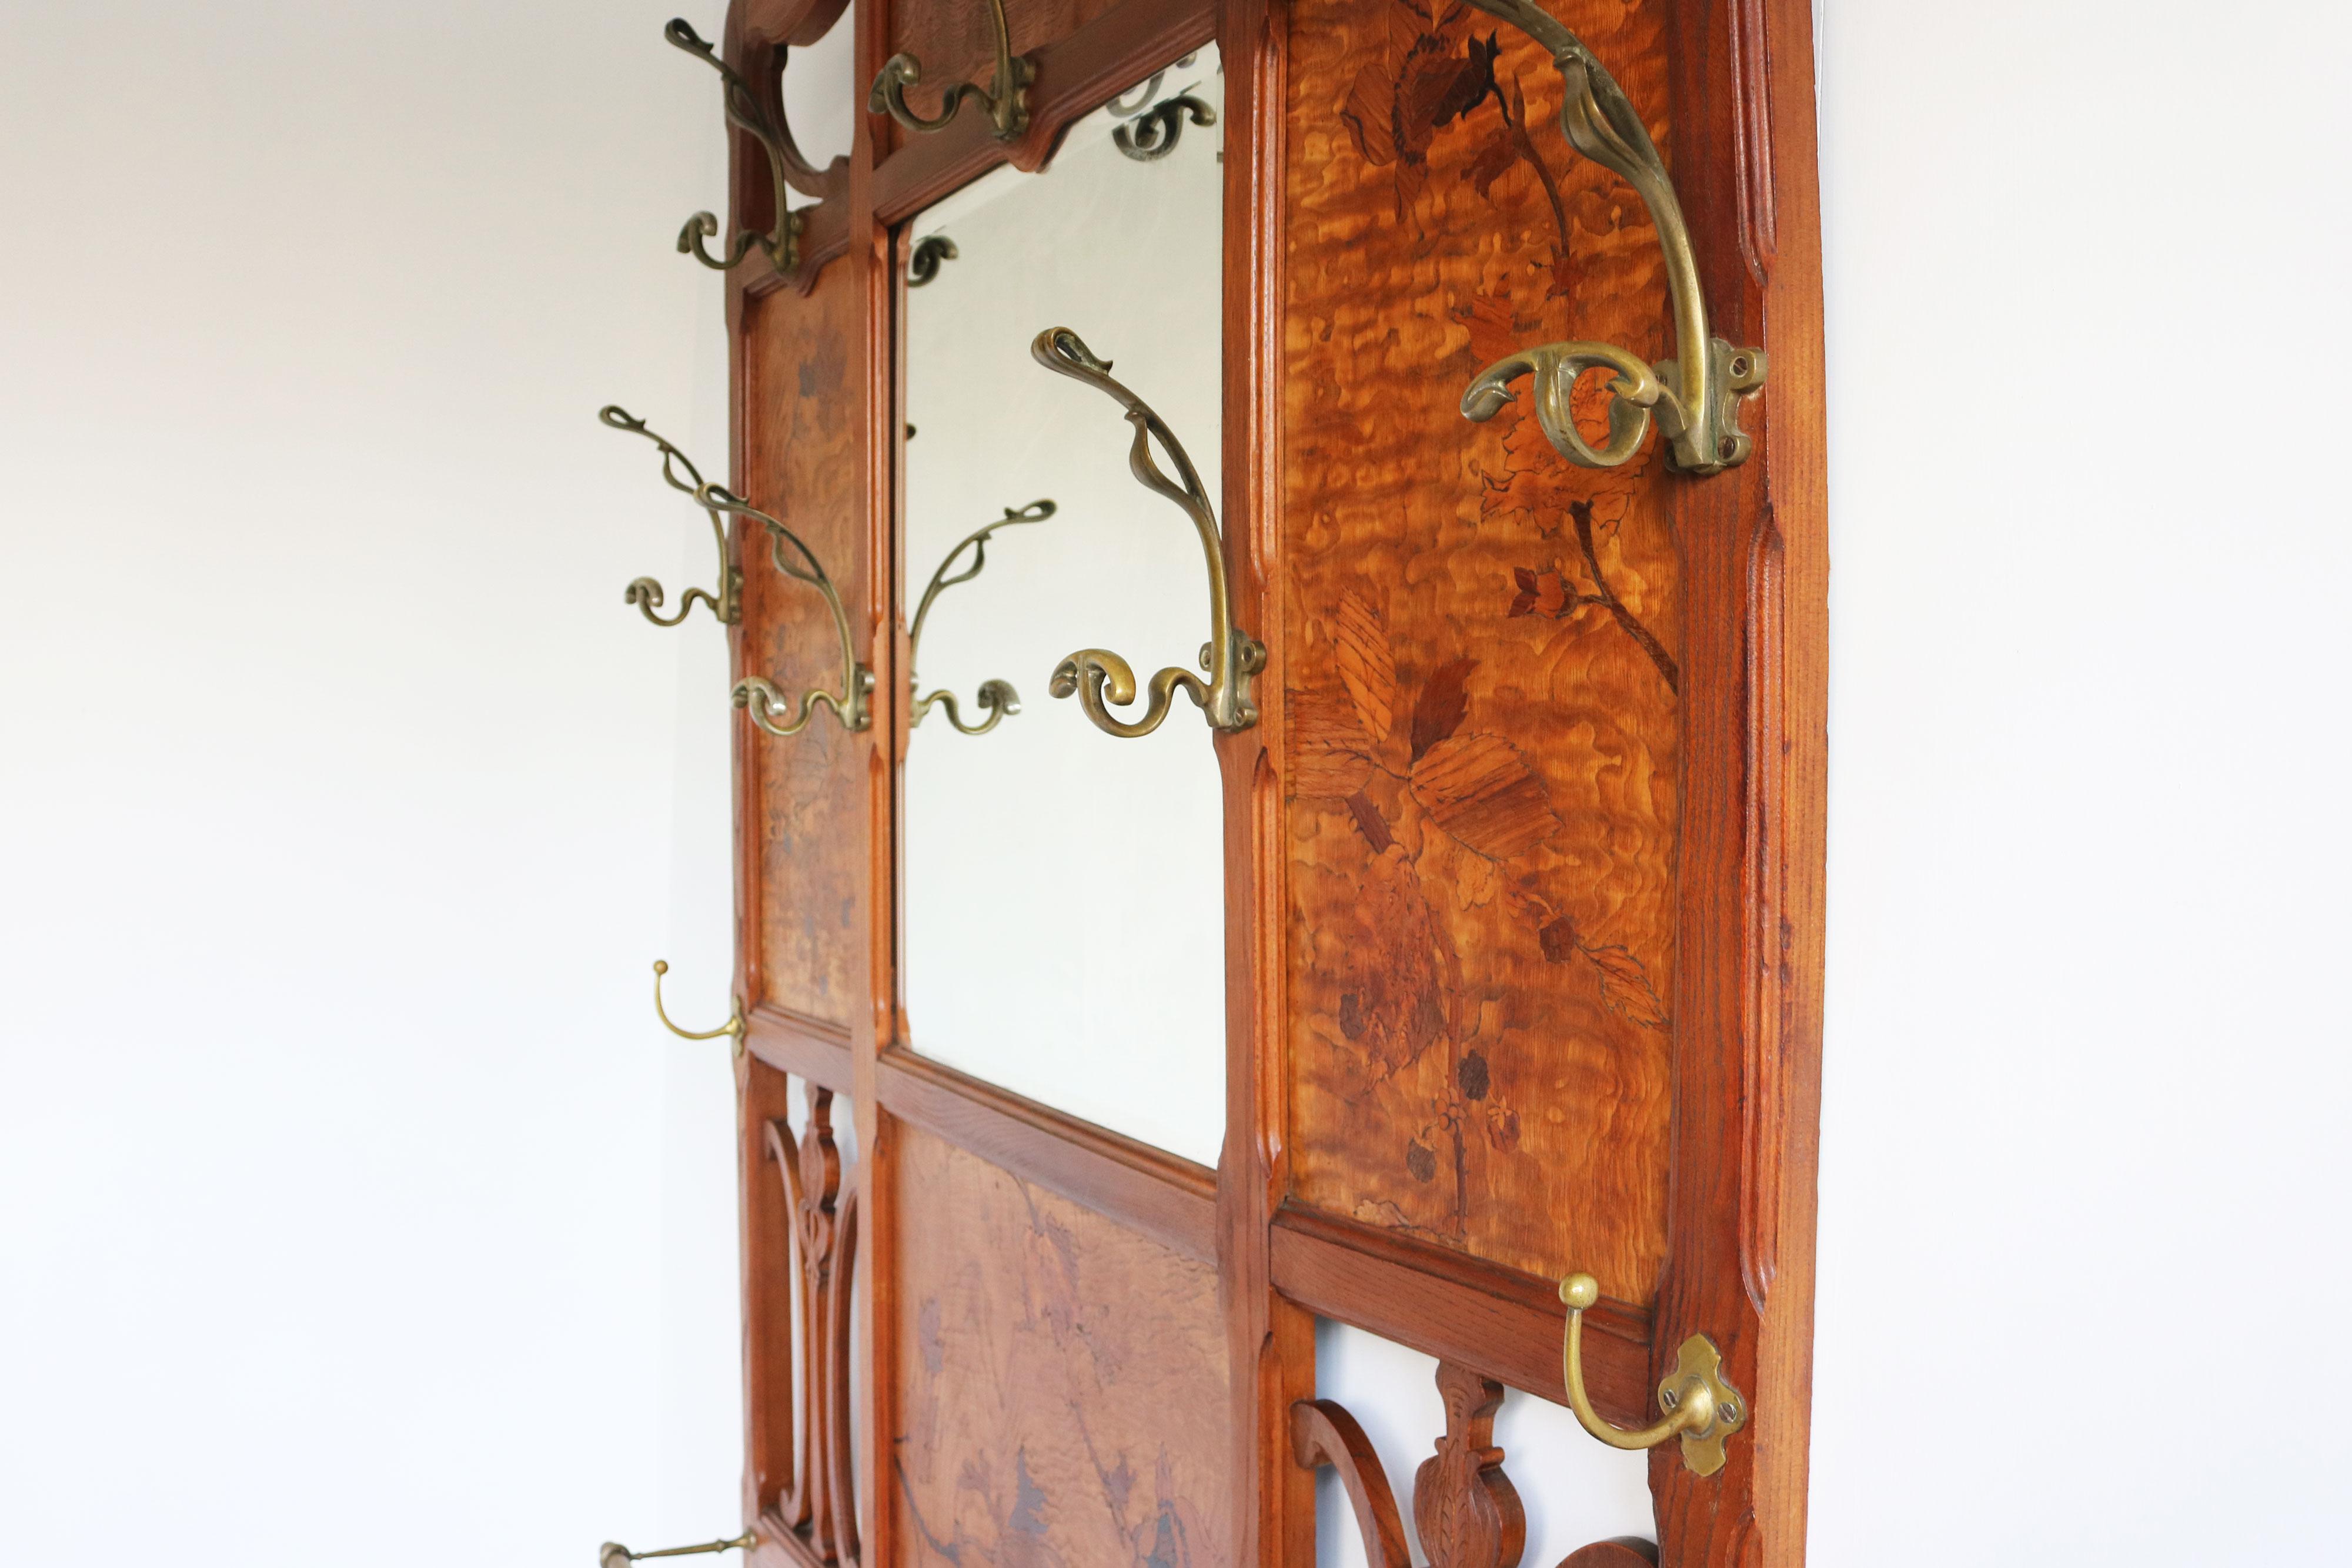 French Art nouveau hall tree / coat rack by Emile galle 1905 marquetry hallway In Good Condition For Sale In Ijzendijke, NL